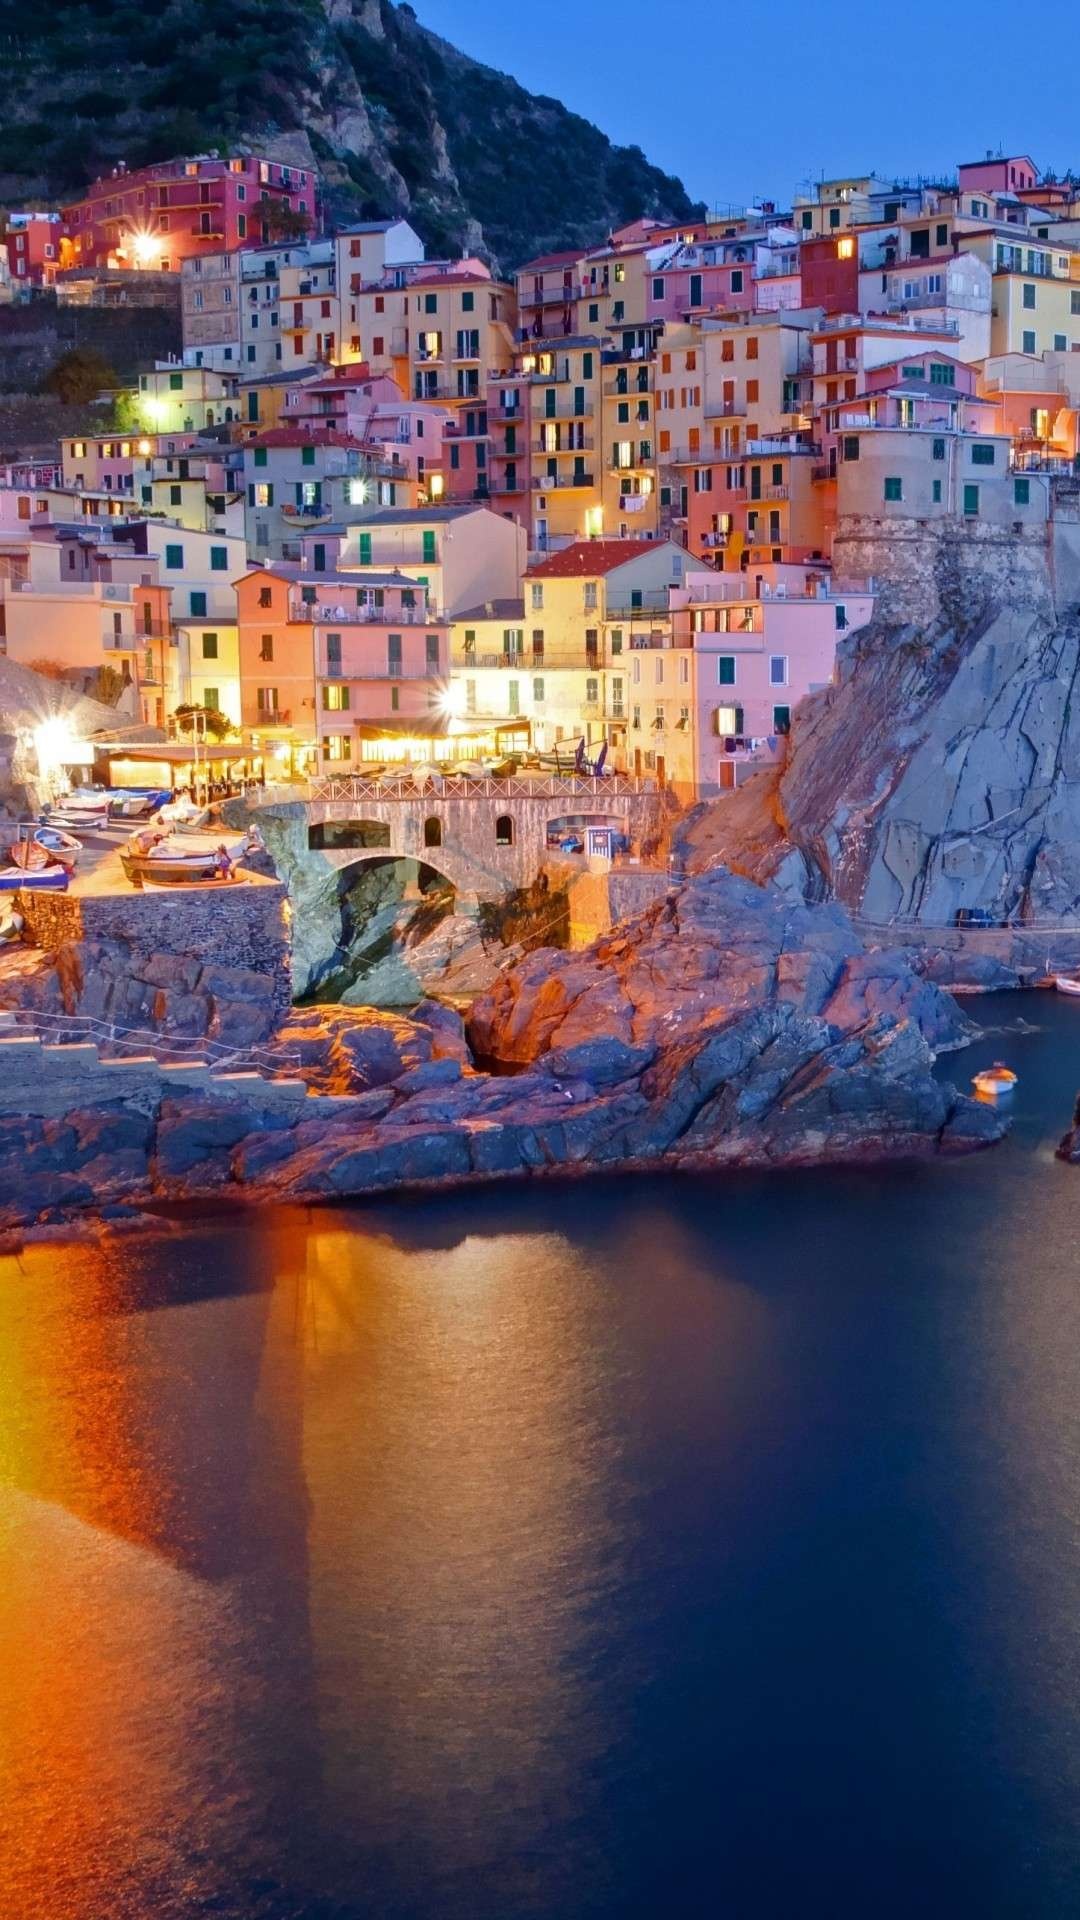 Sicily on iPhone, Stunning wallpapers, Italian charm, Captivating scenery, 1080x1920 Full HD Phone